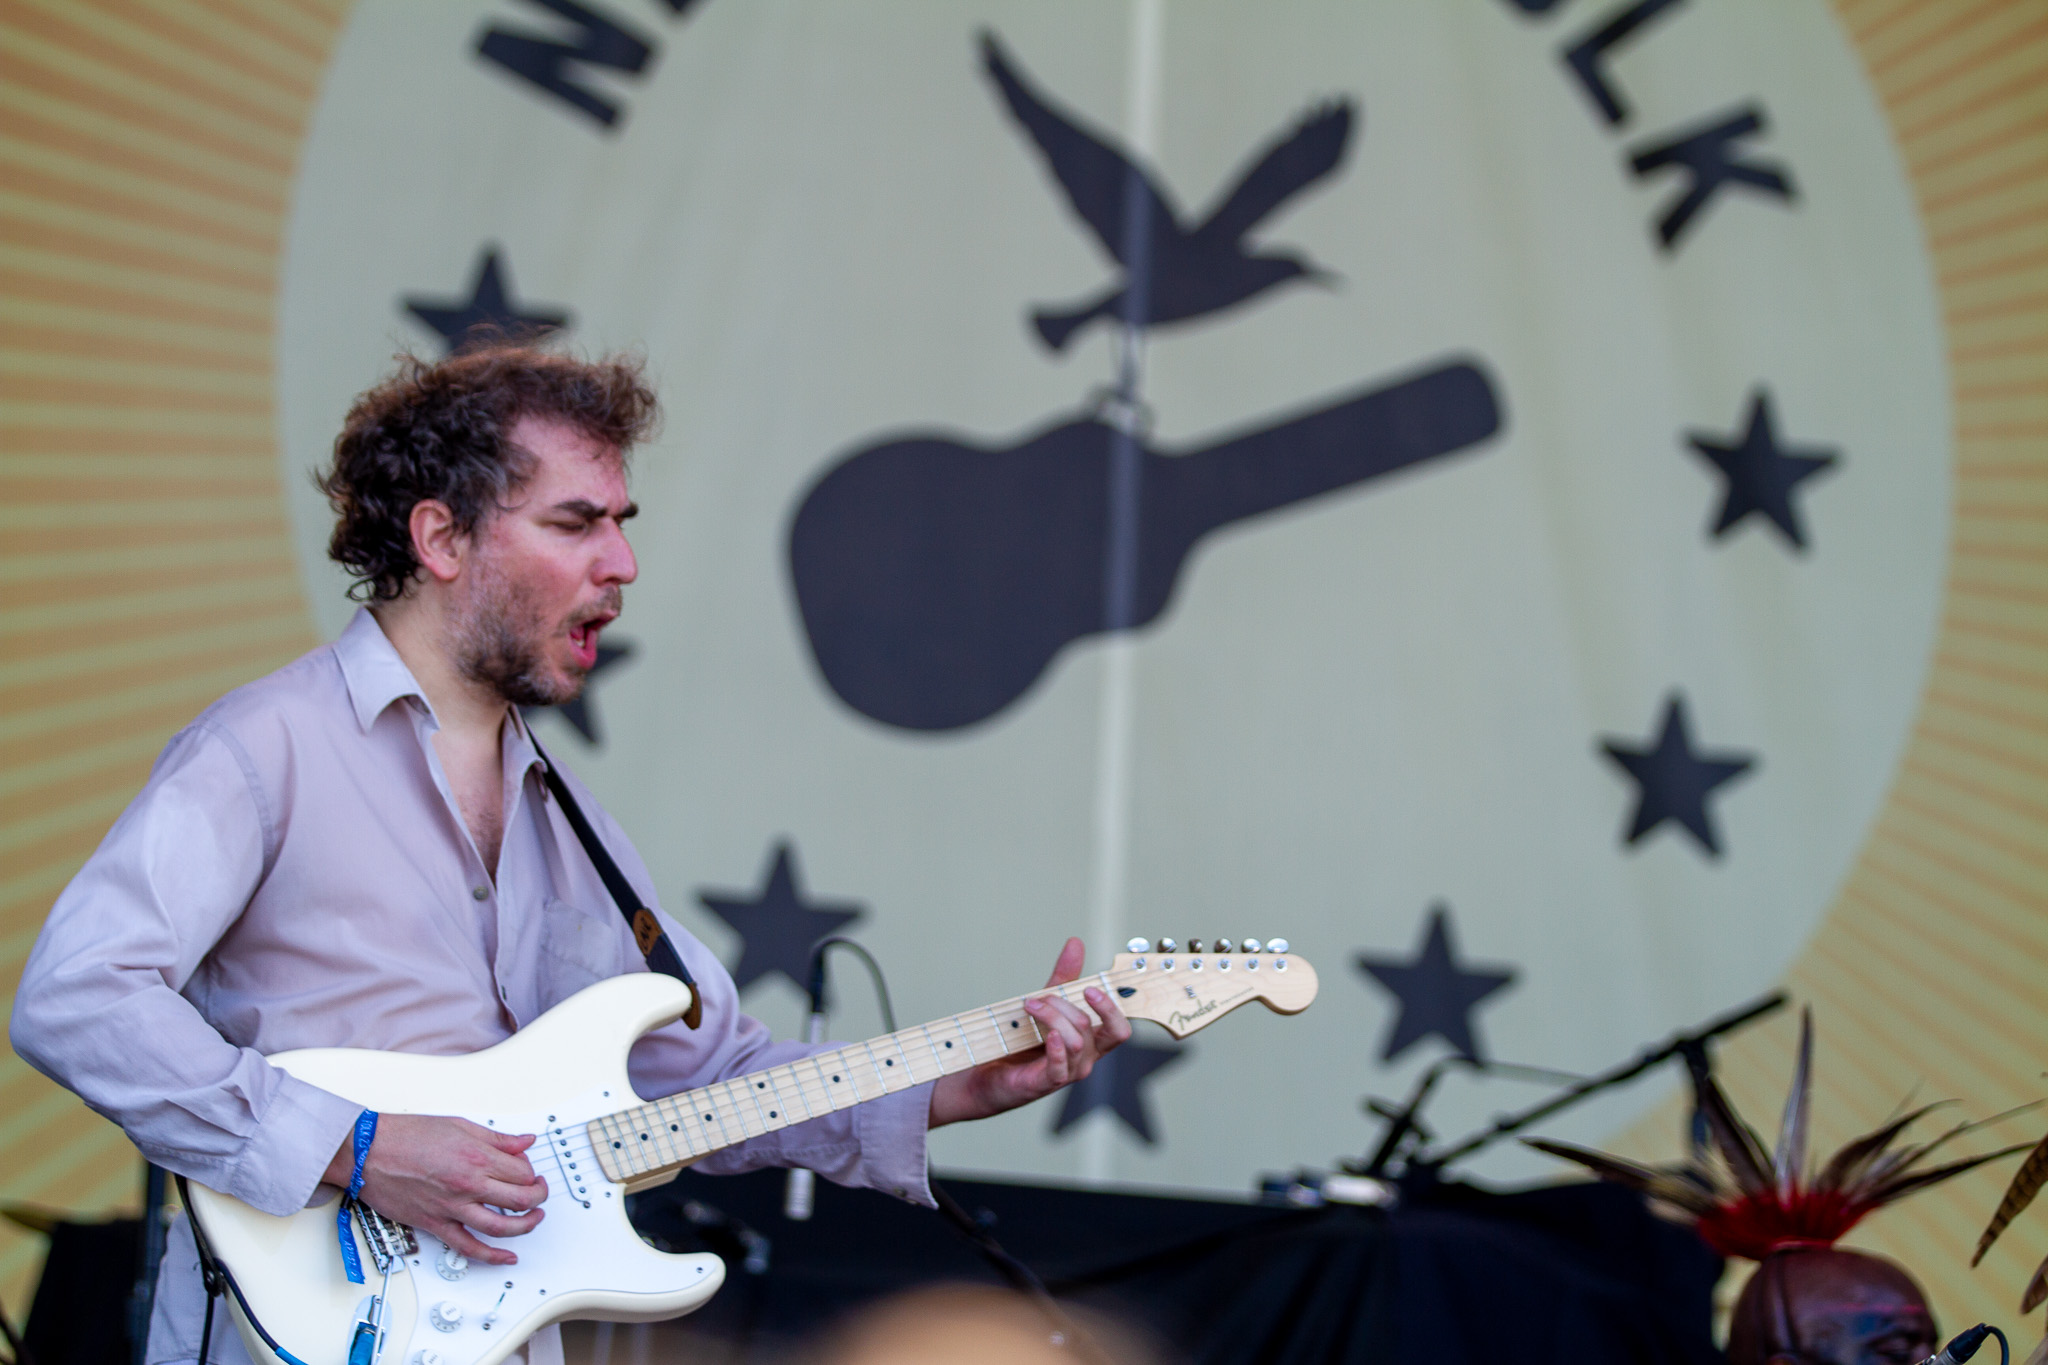 Yonatan Gat is a composer, producer and guitarist who performs with Eastern Medicine Singers. 